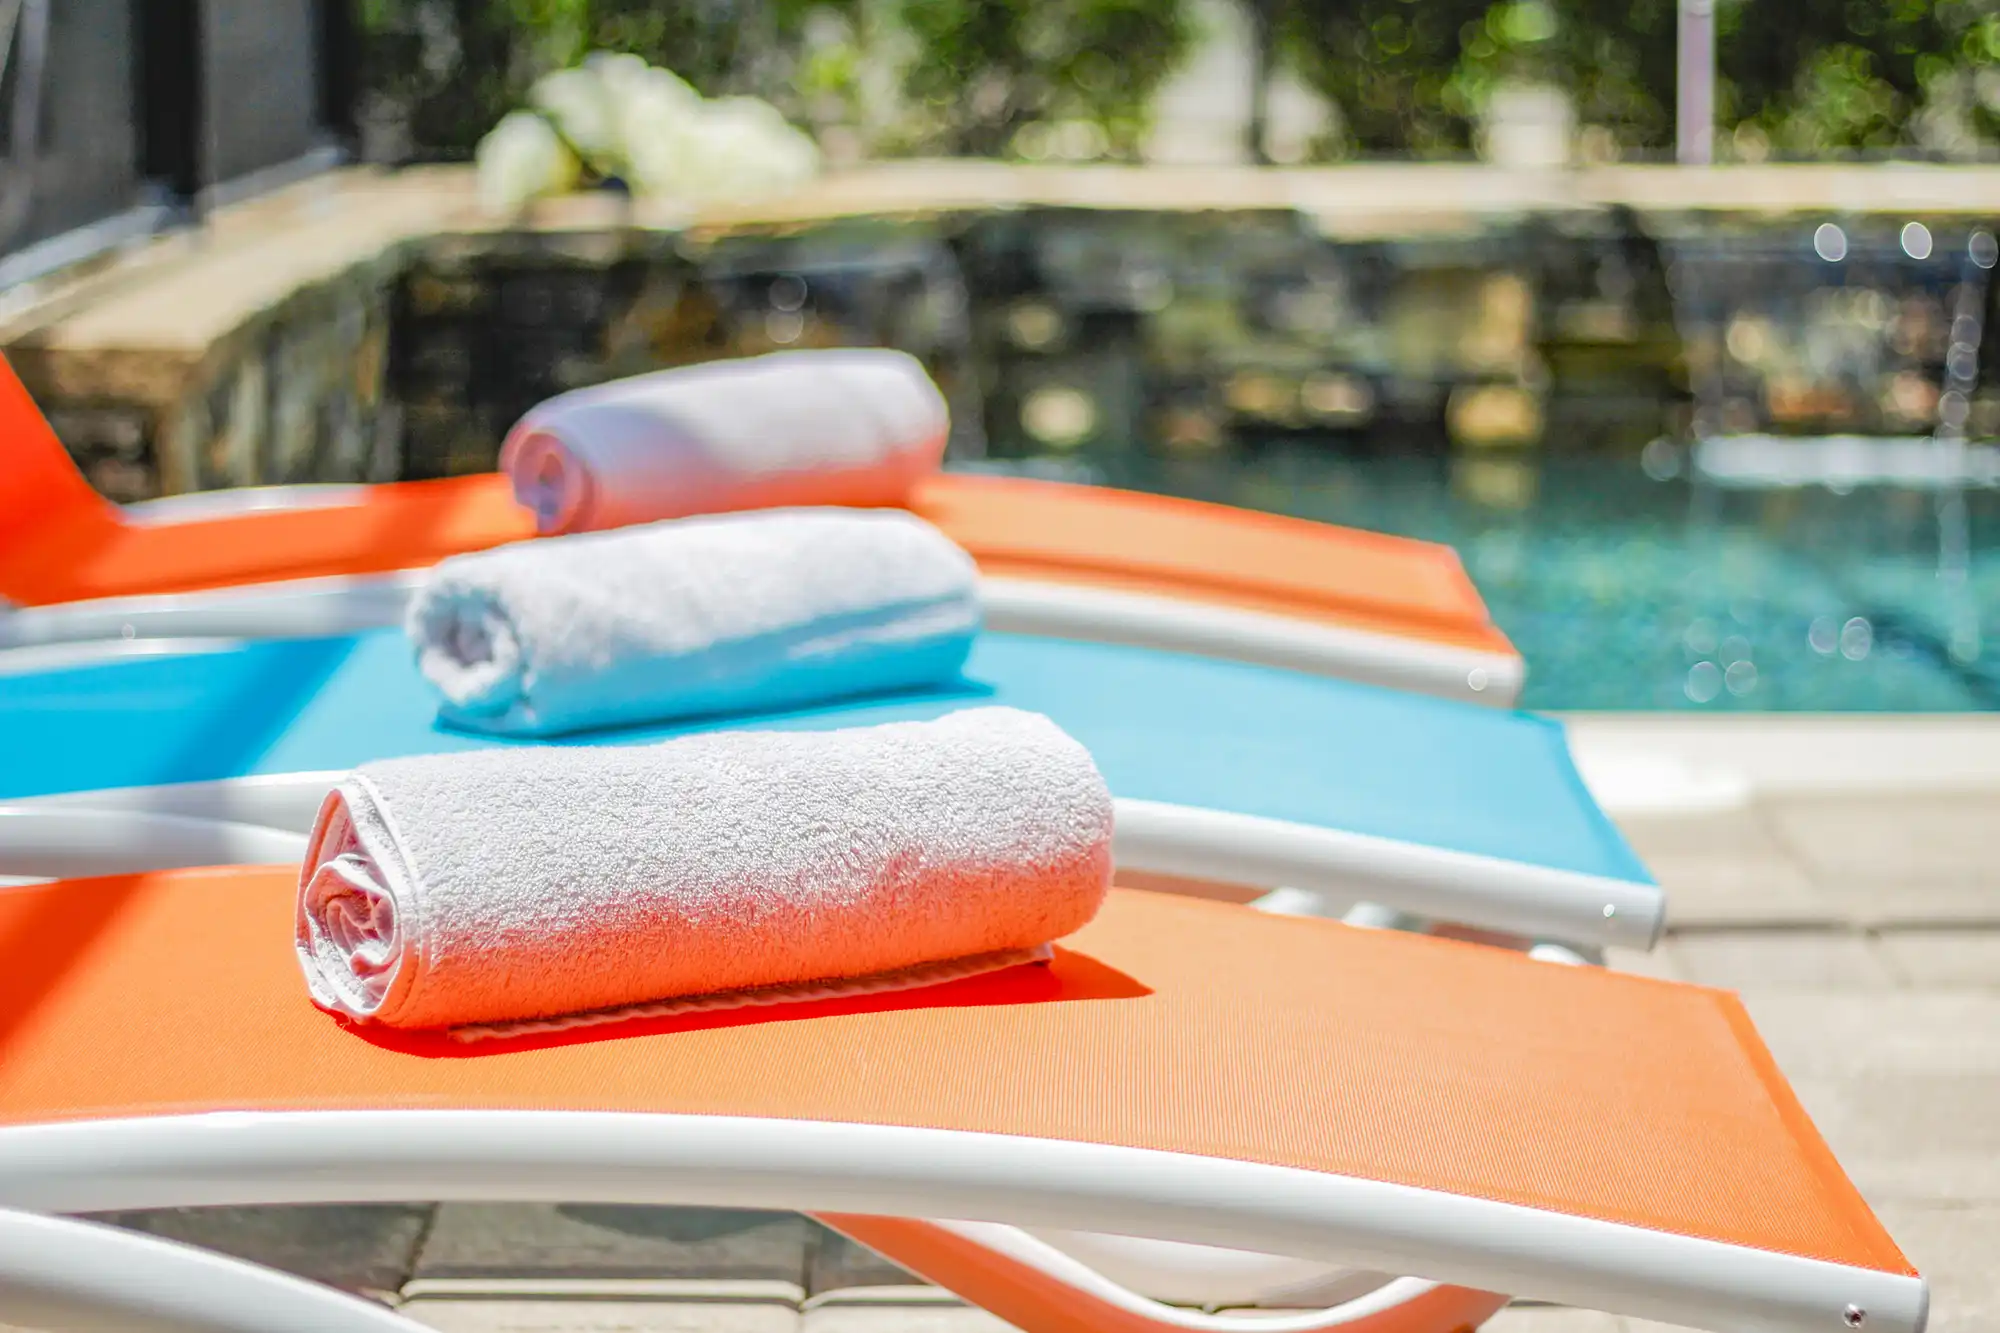 Pool Chairs with Towels - Vacation Rental Photography - Kissimmee, FL